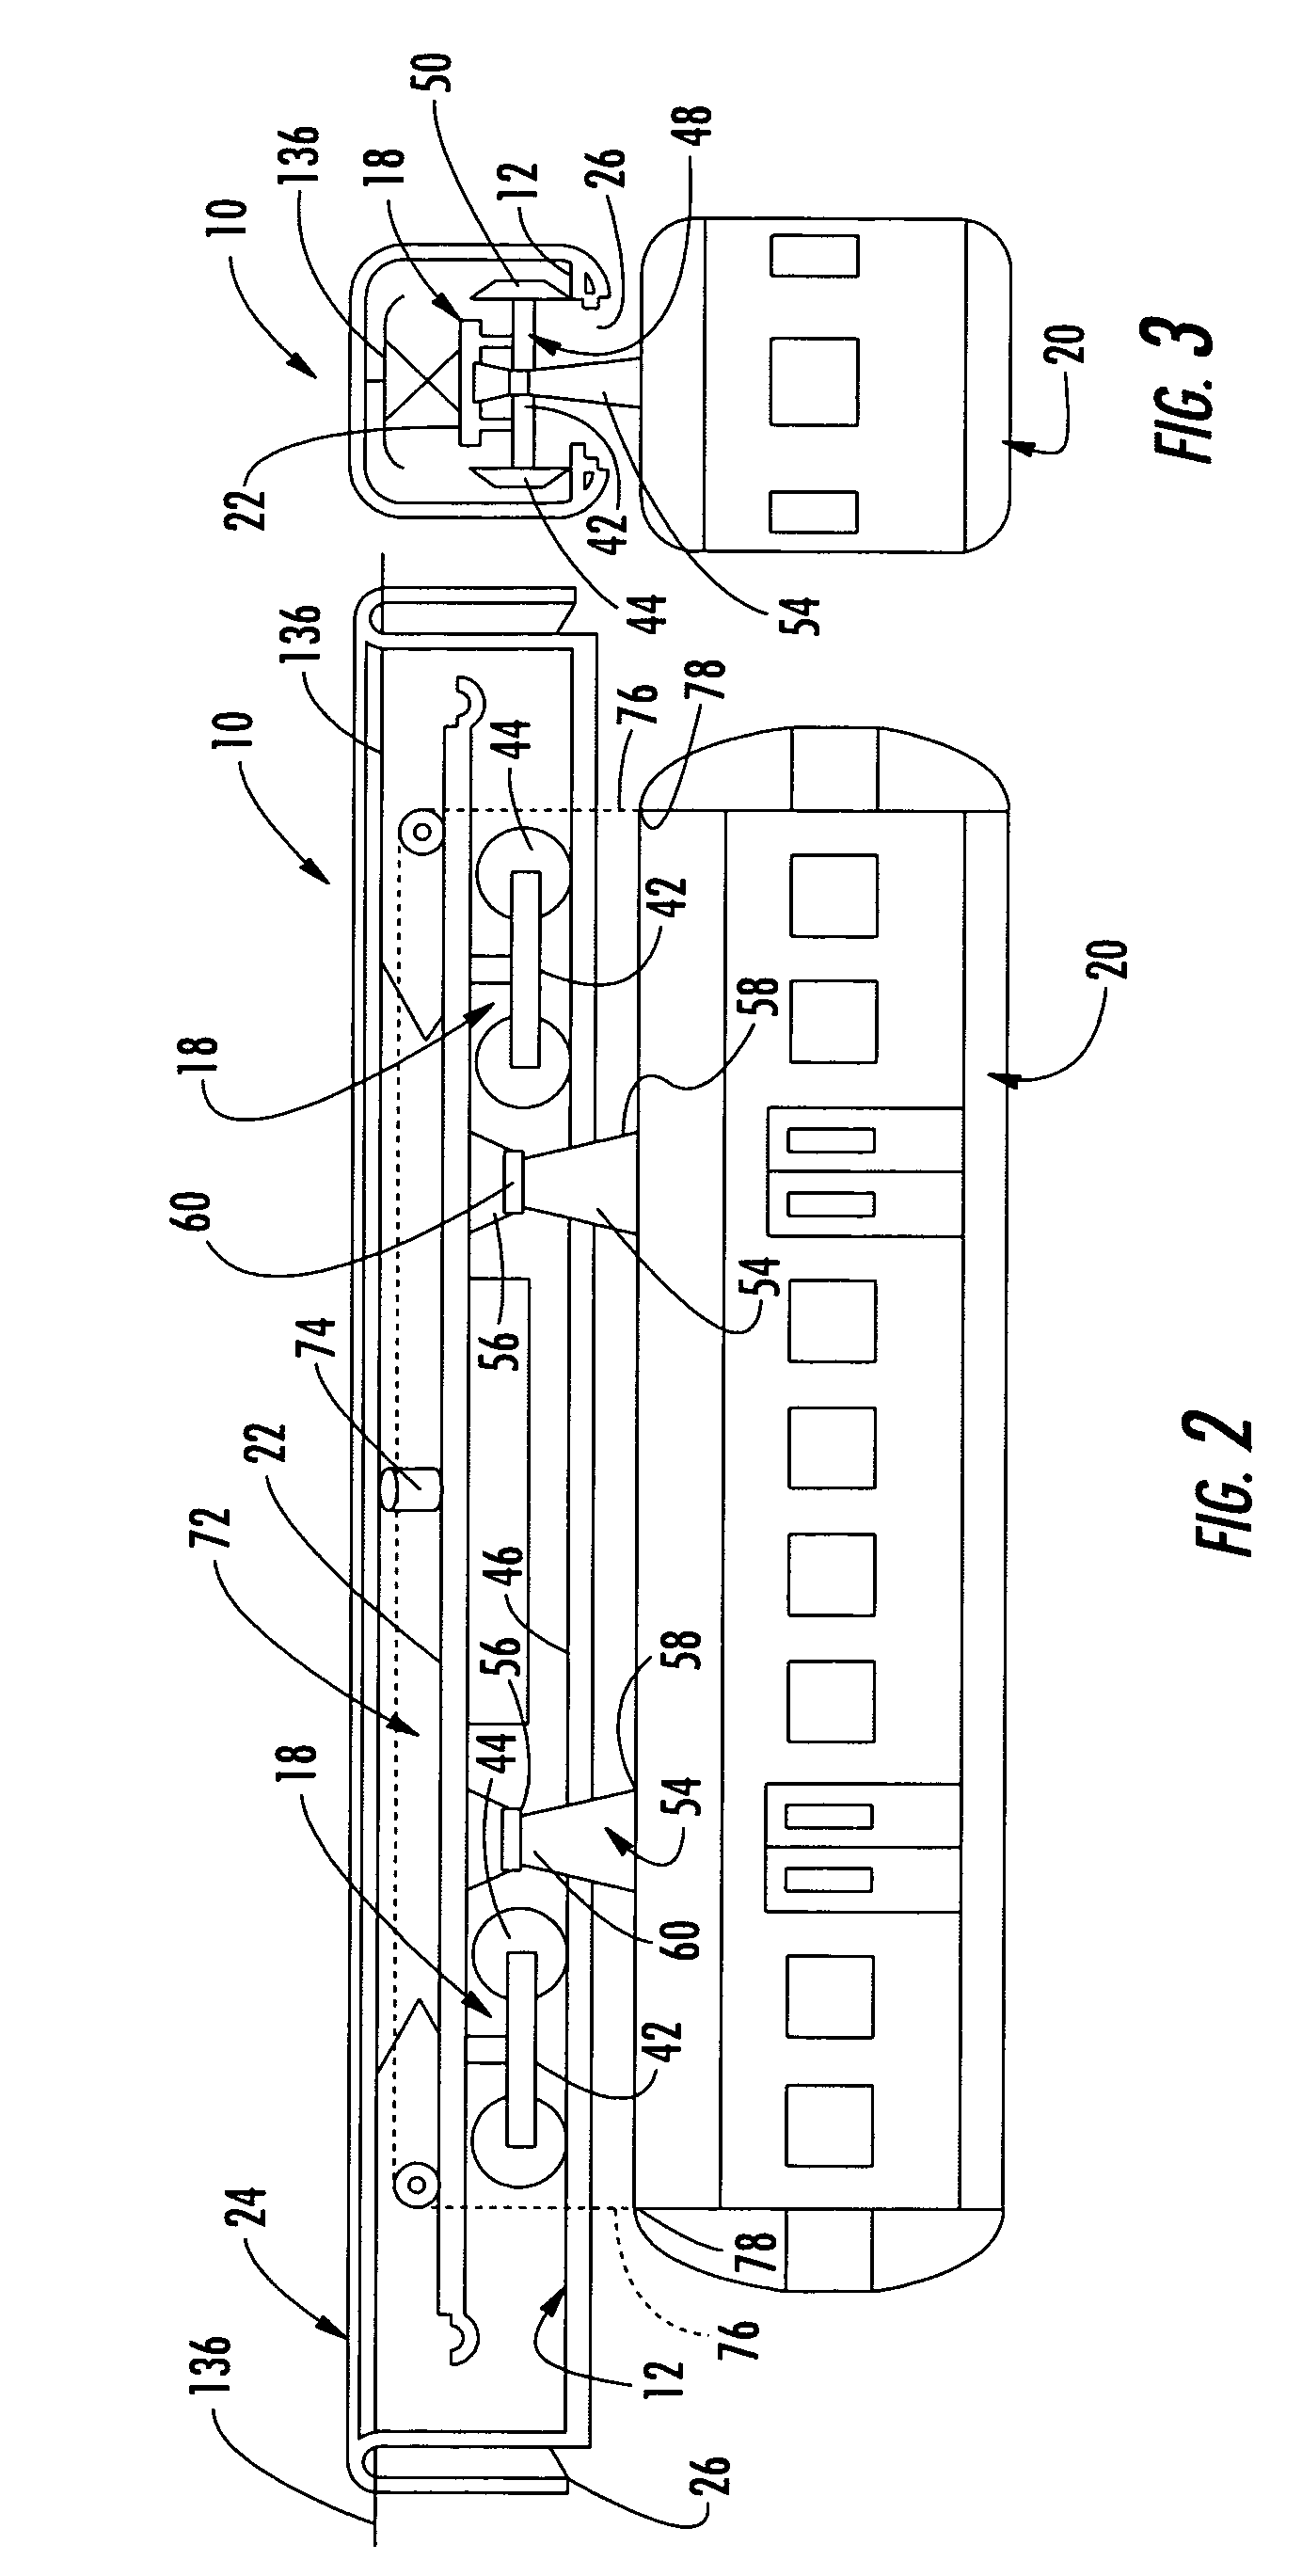 Overhead suspended transportation system and method